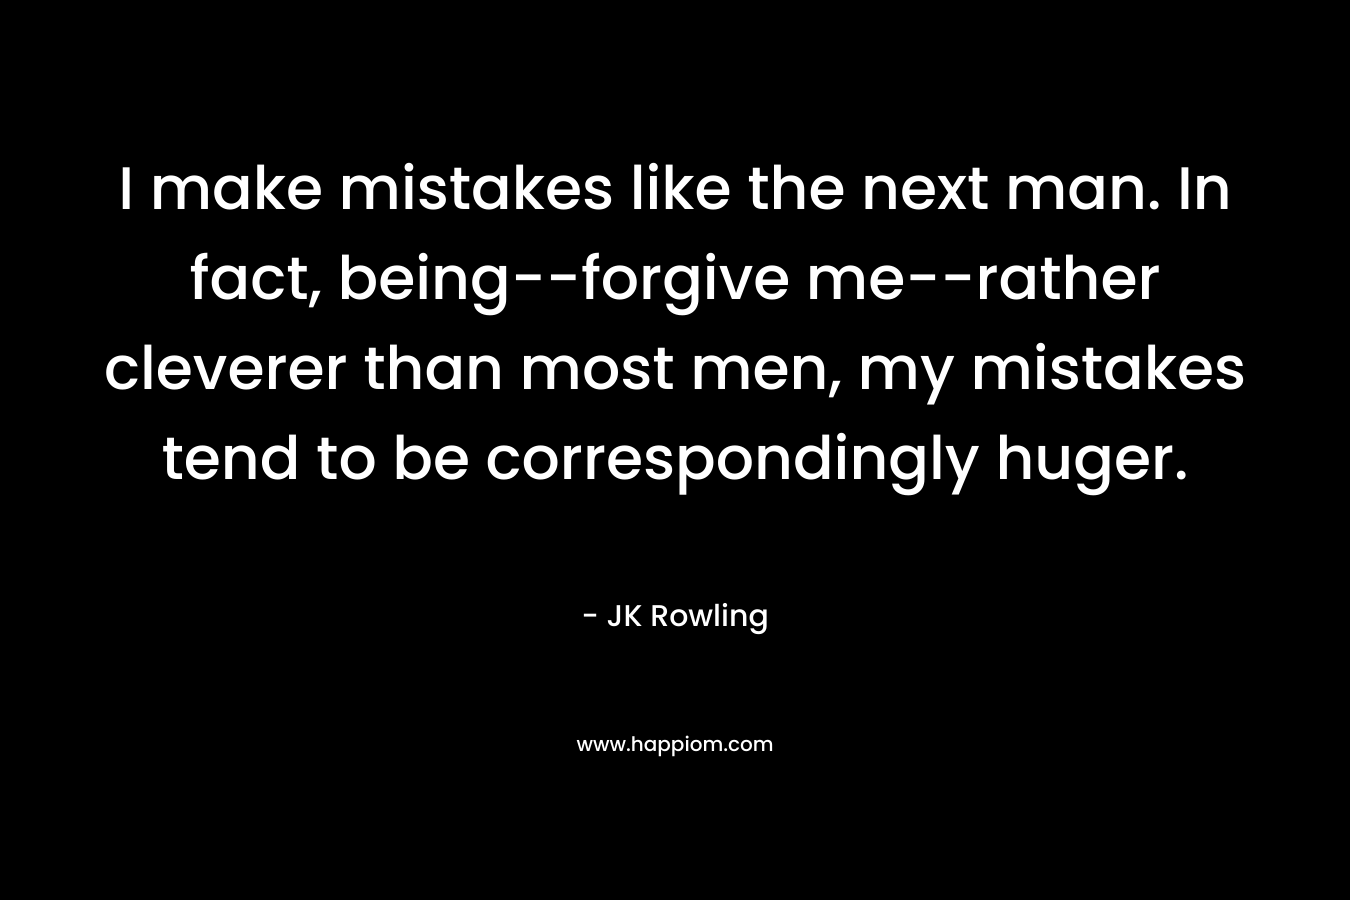 I make mistakes like the next man. In fact, being--forgive me--rather cleverer than most men, my mistakes tend to be correspondingly huger.